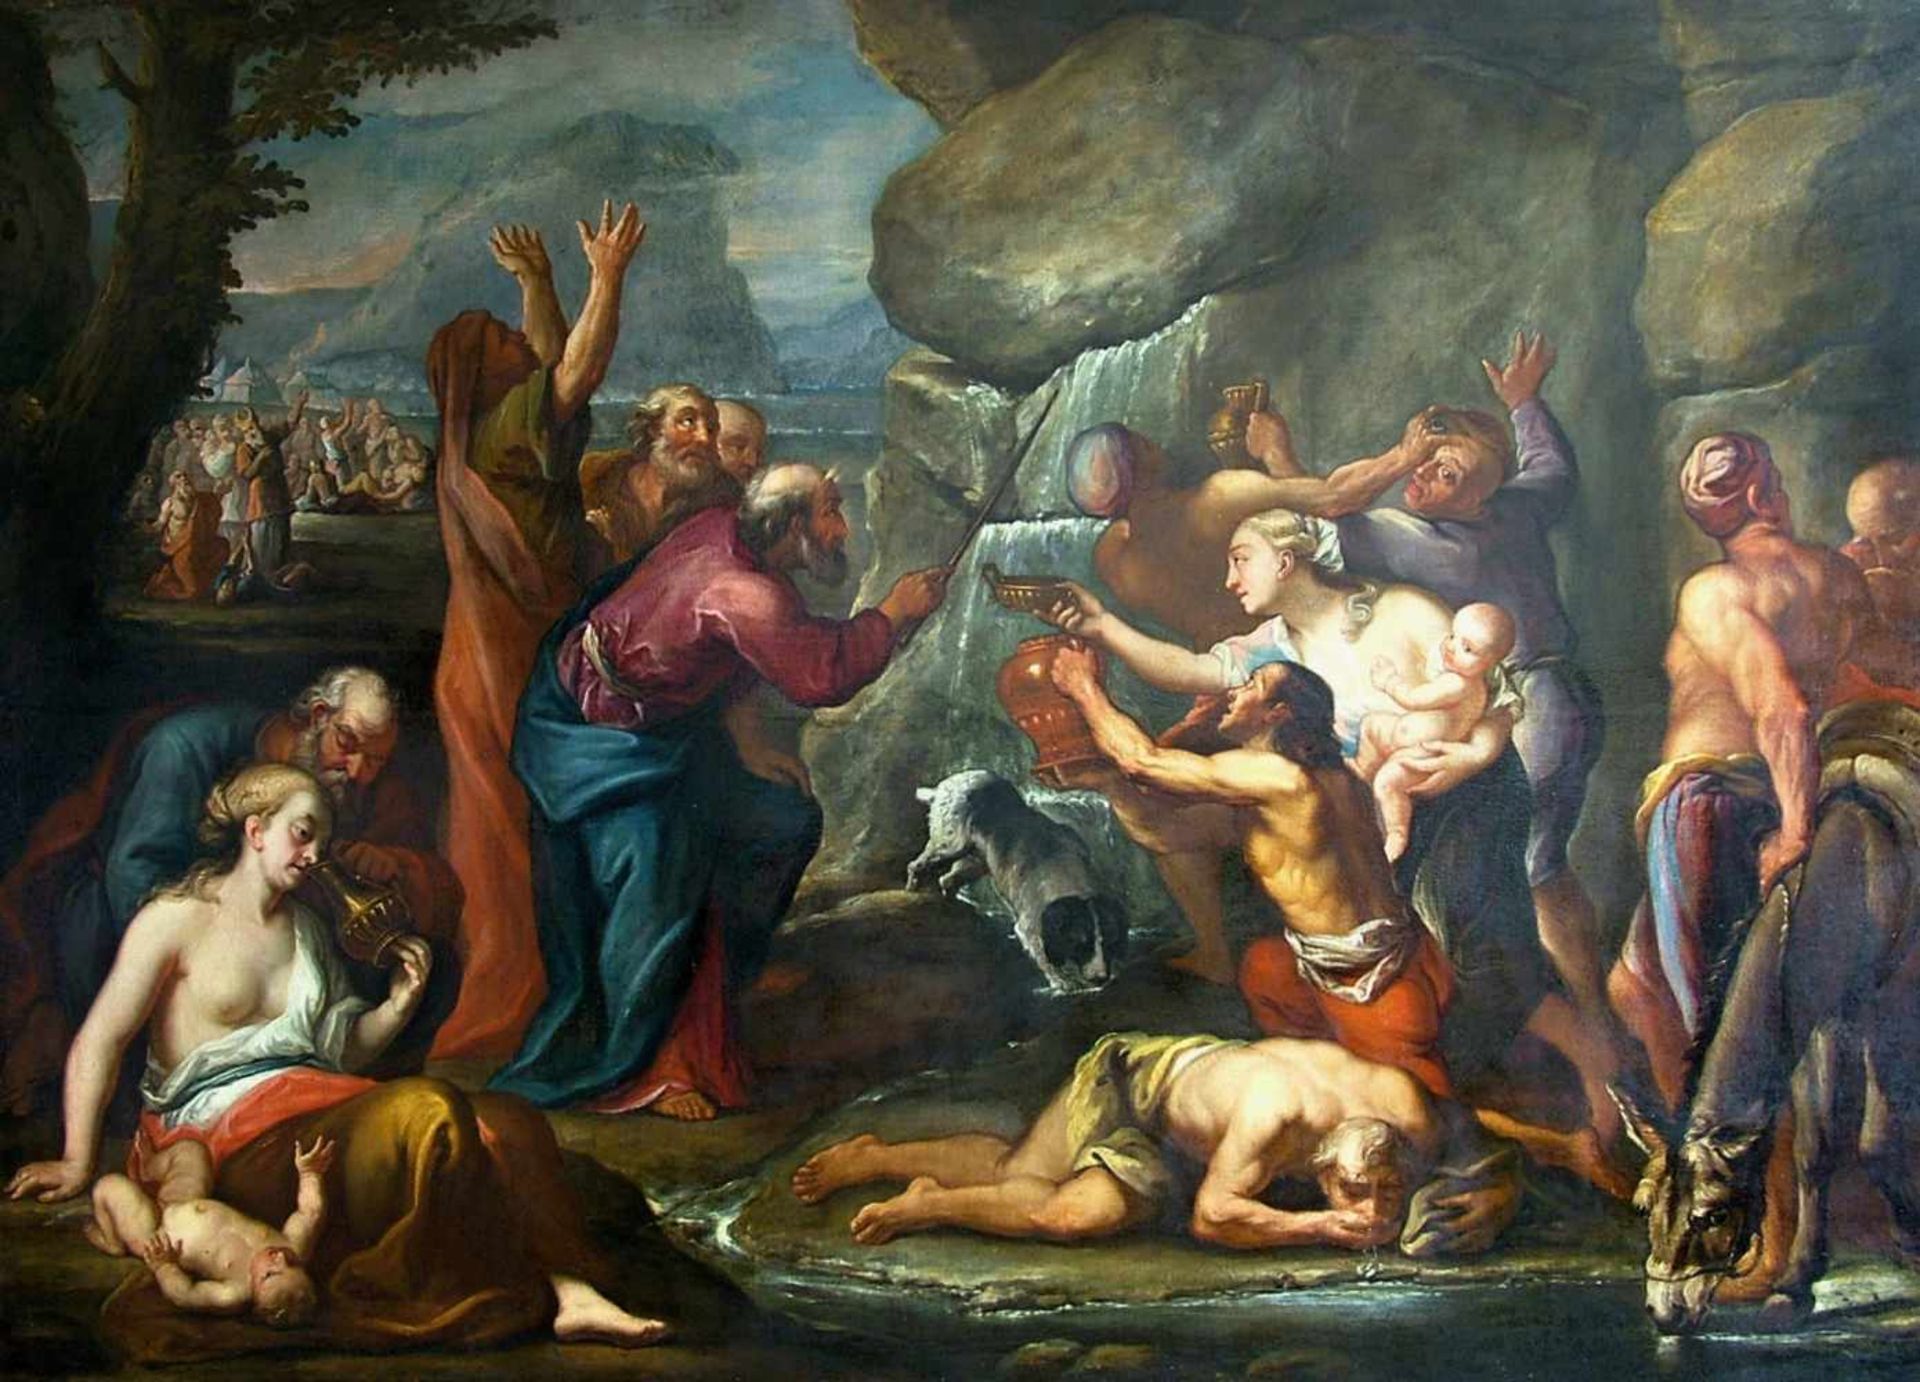 Jacob de Backer (Antwerp, c. 1555 - c. 1585) attributed Moses Striking Water from the Rock, end of